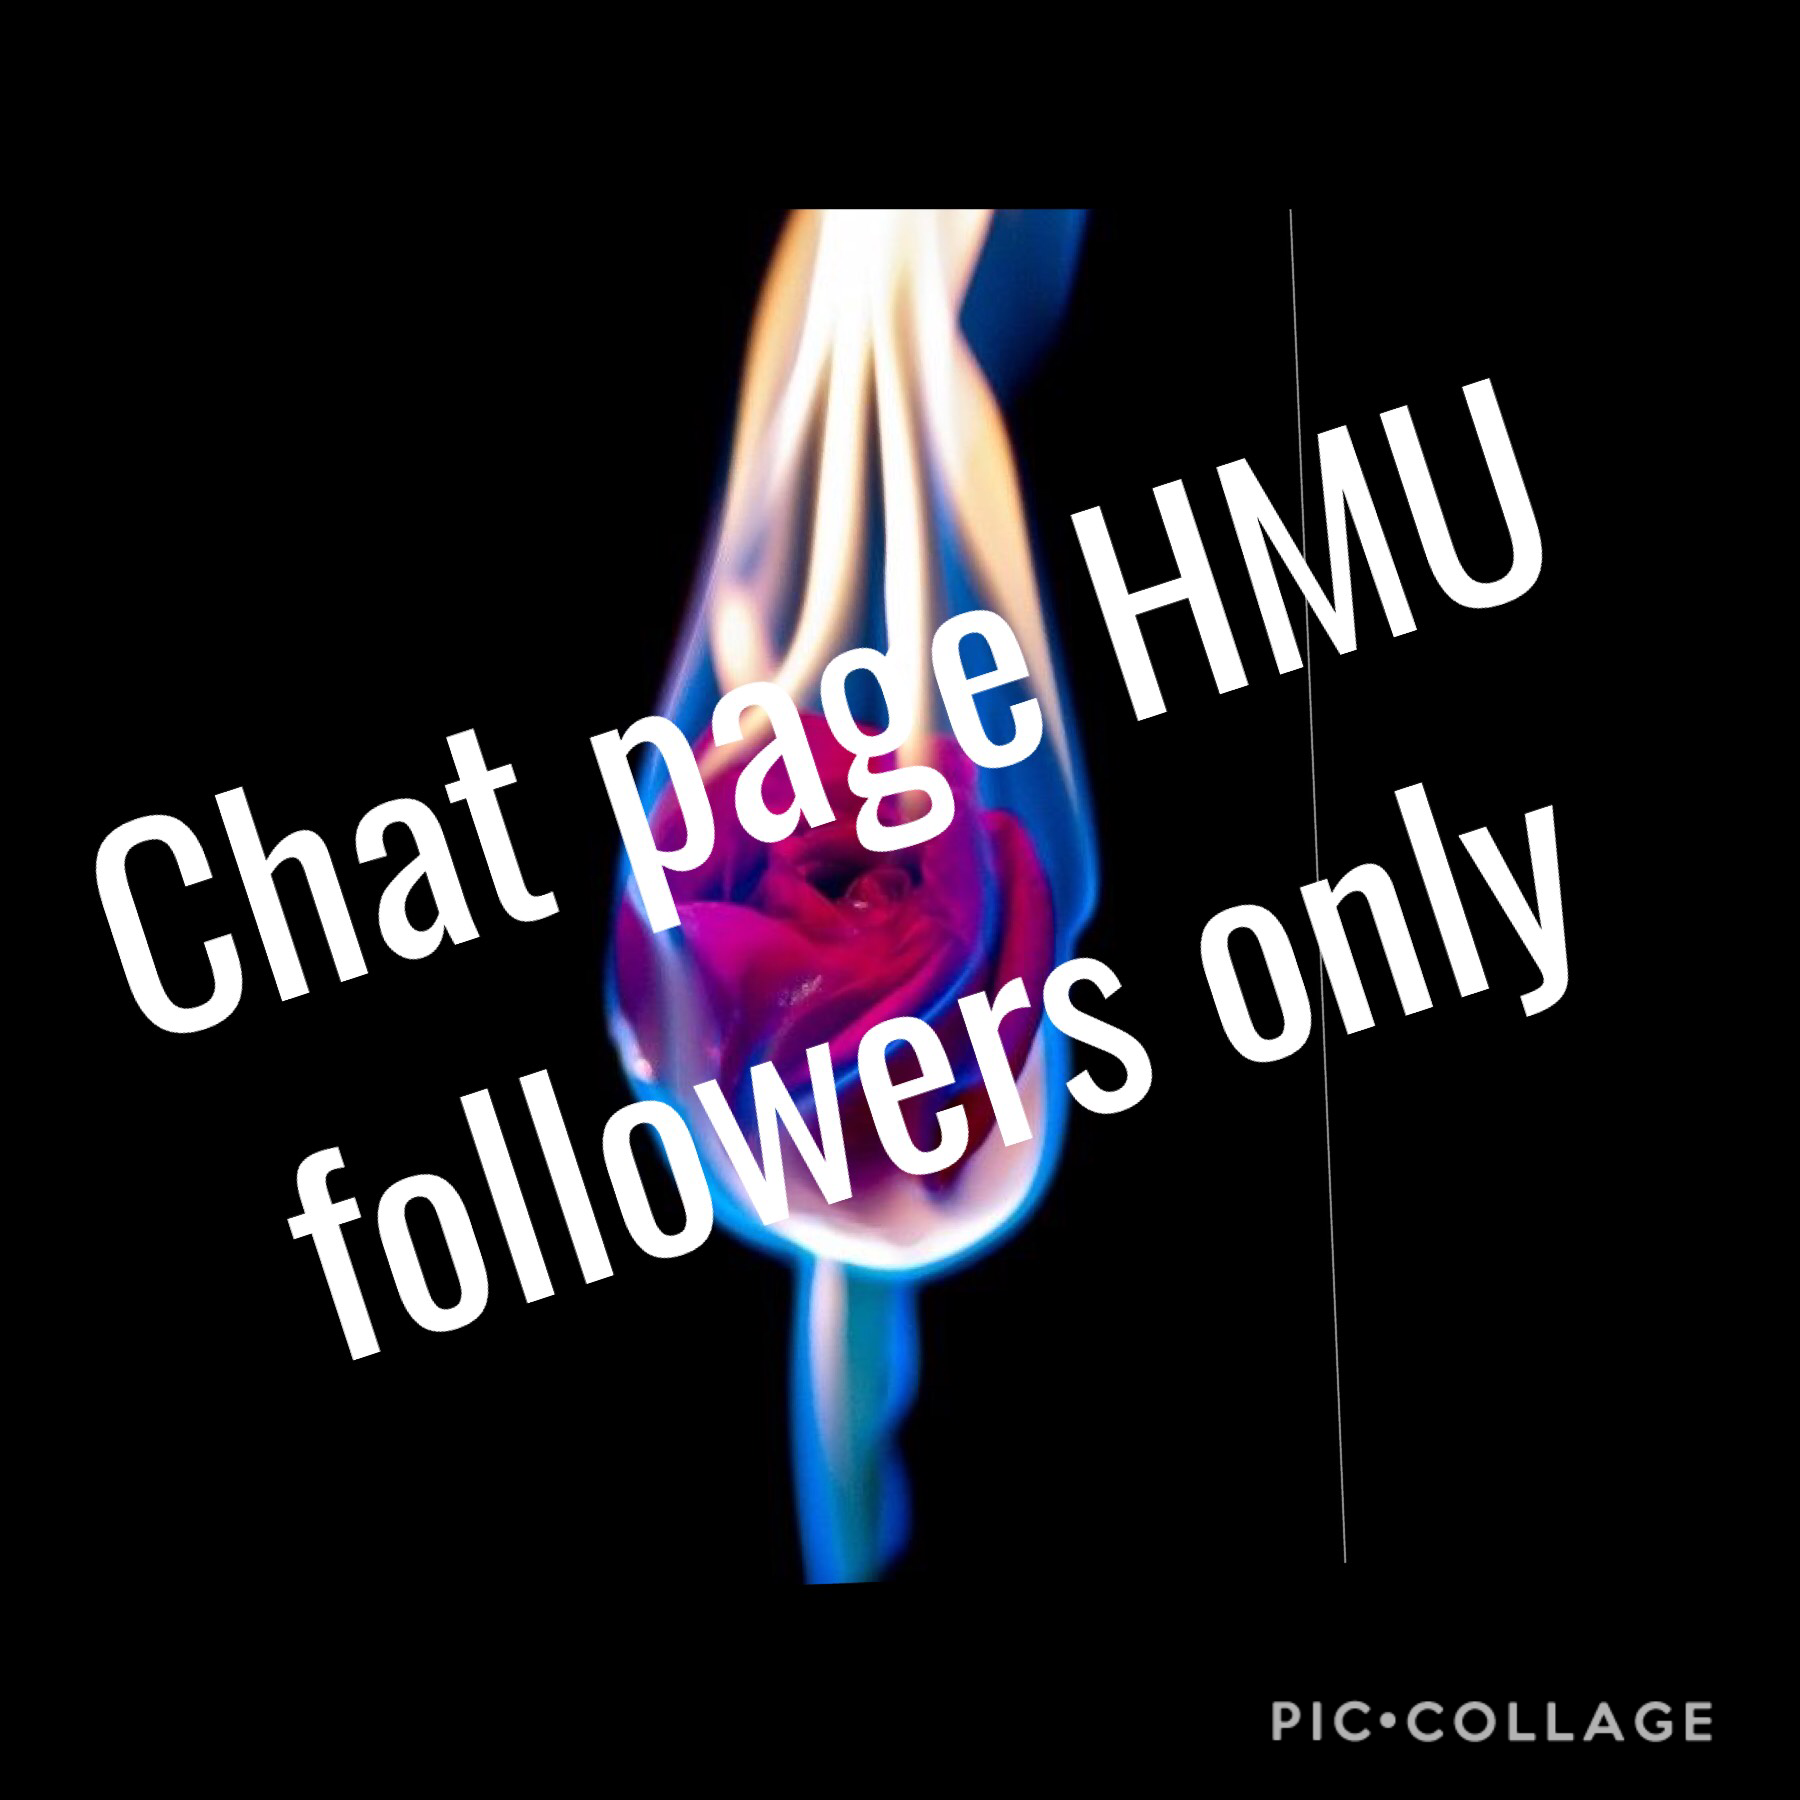 Chat page jk for followers